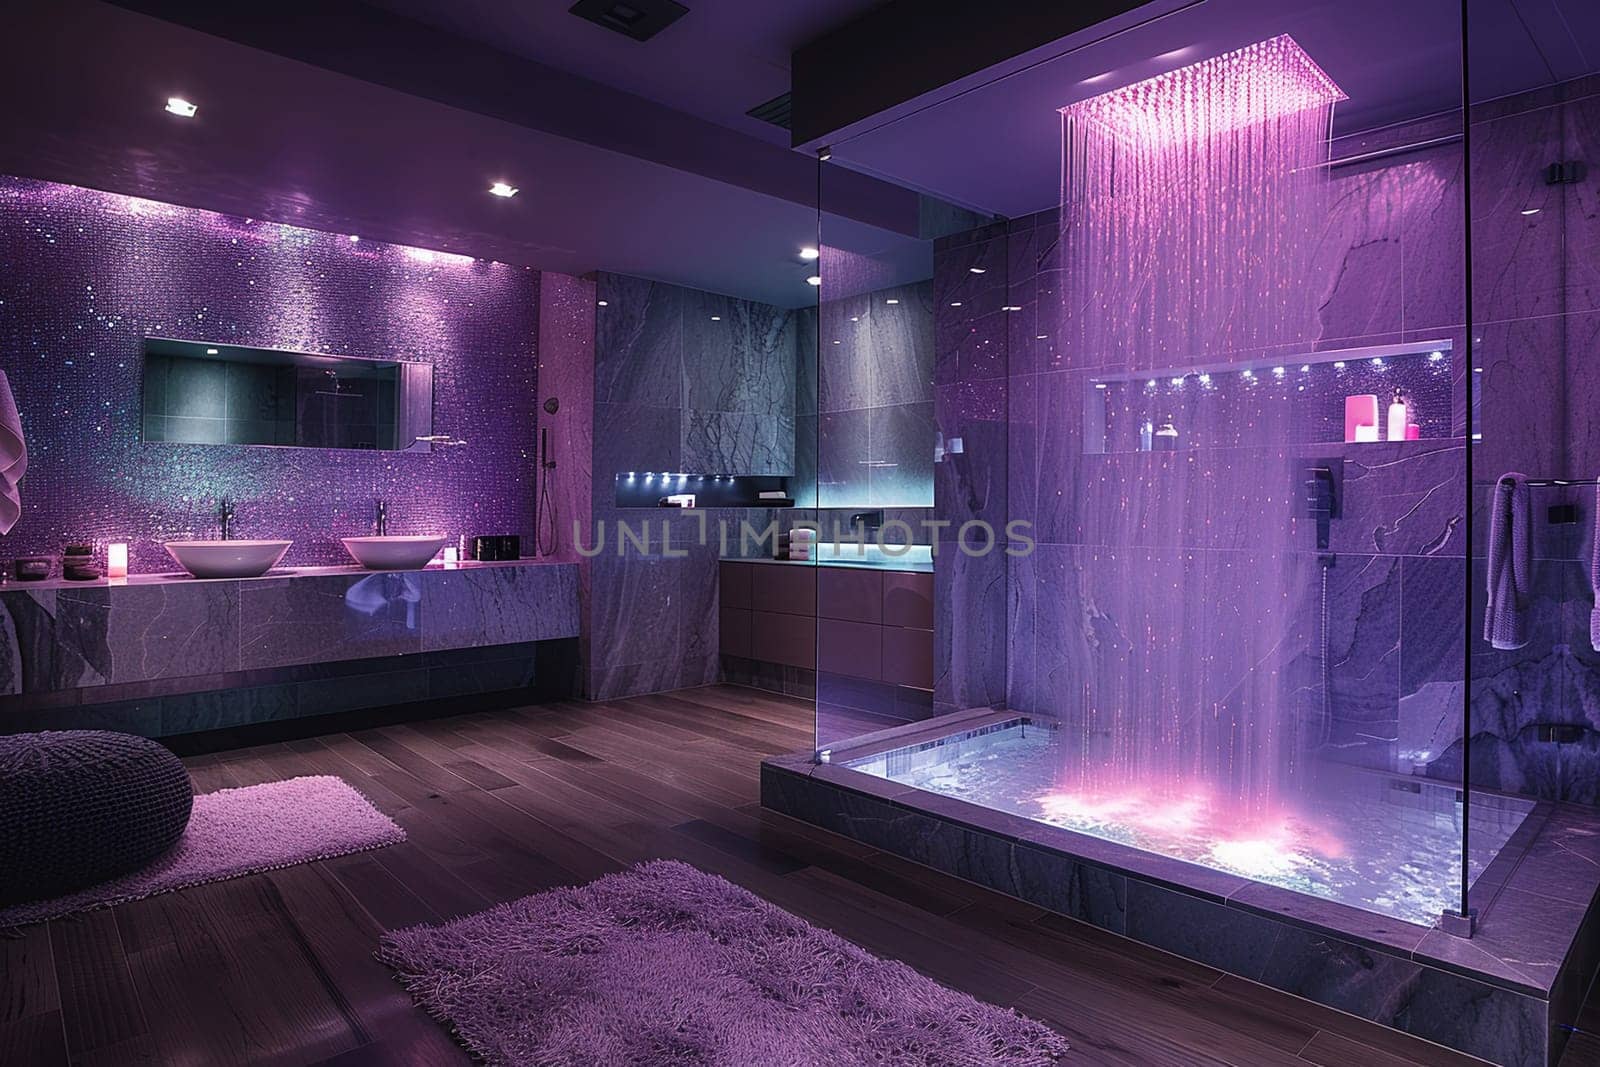 Contemporary bathroom with a glass-enclosed waterfall shower and ambient lighting